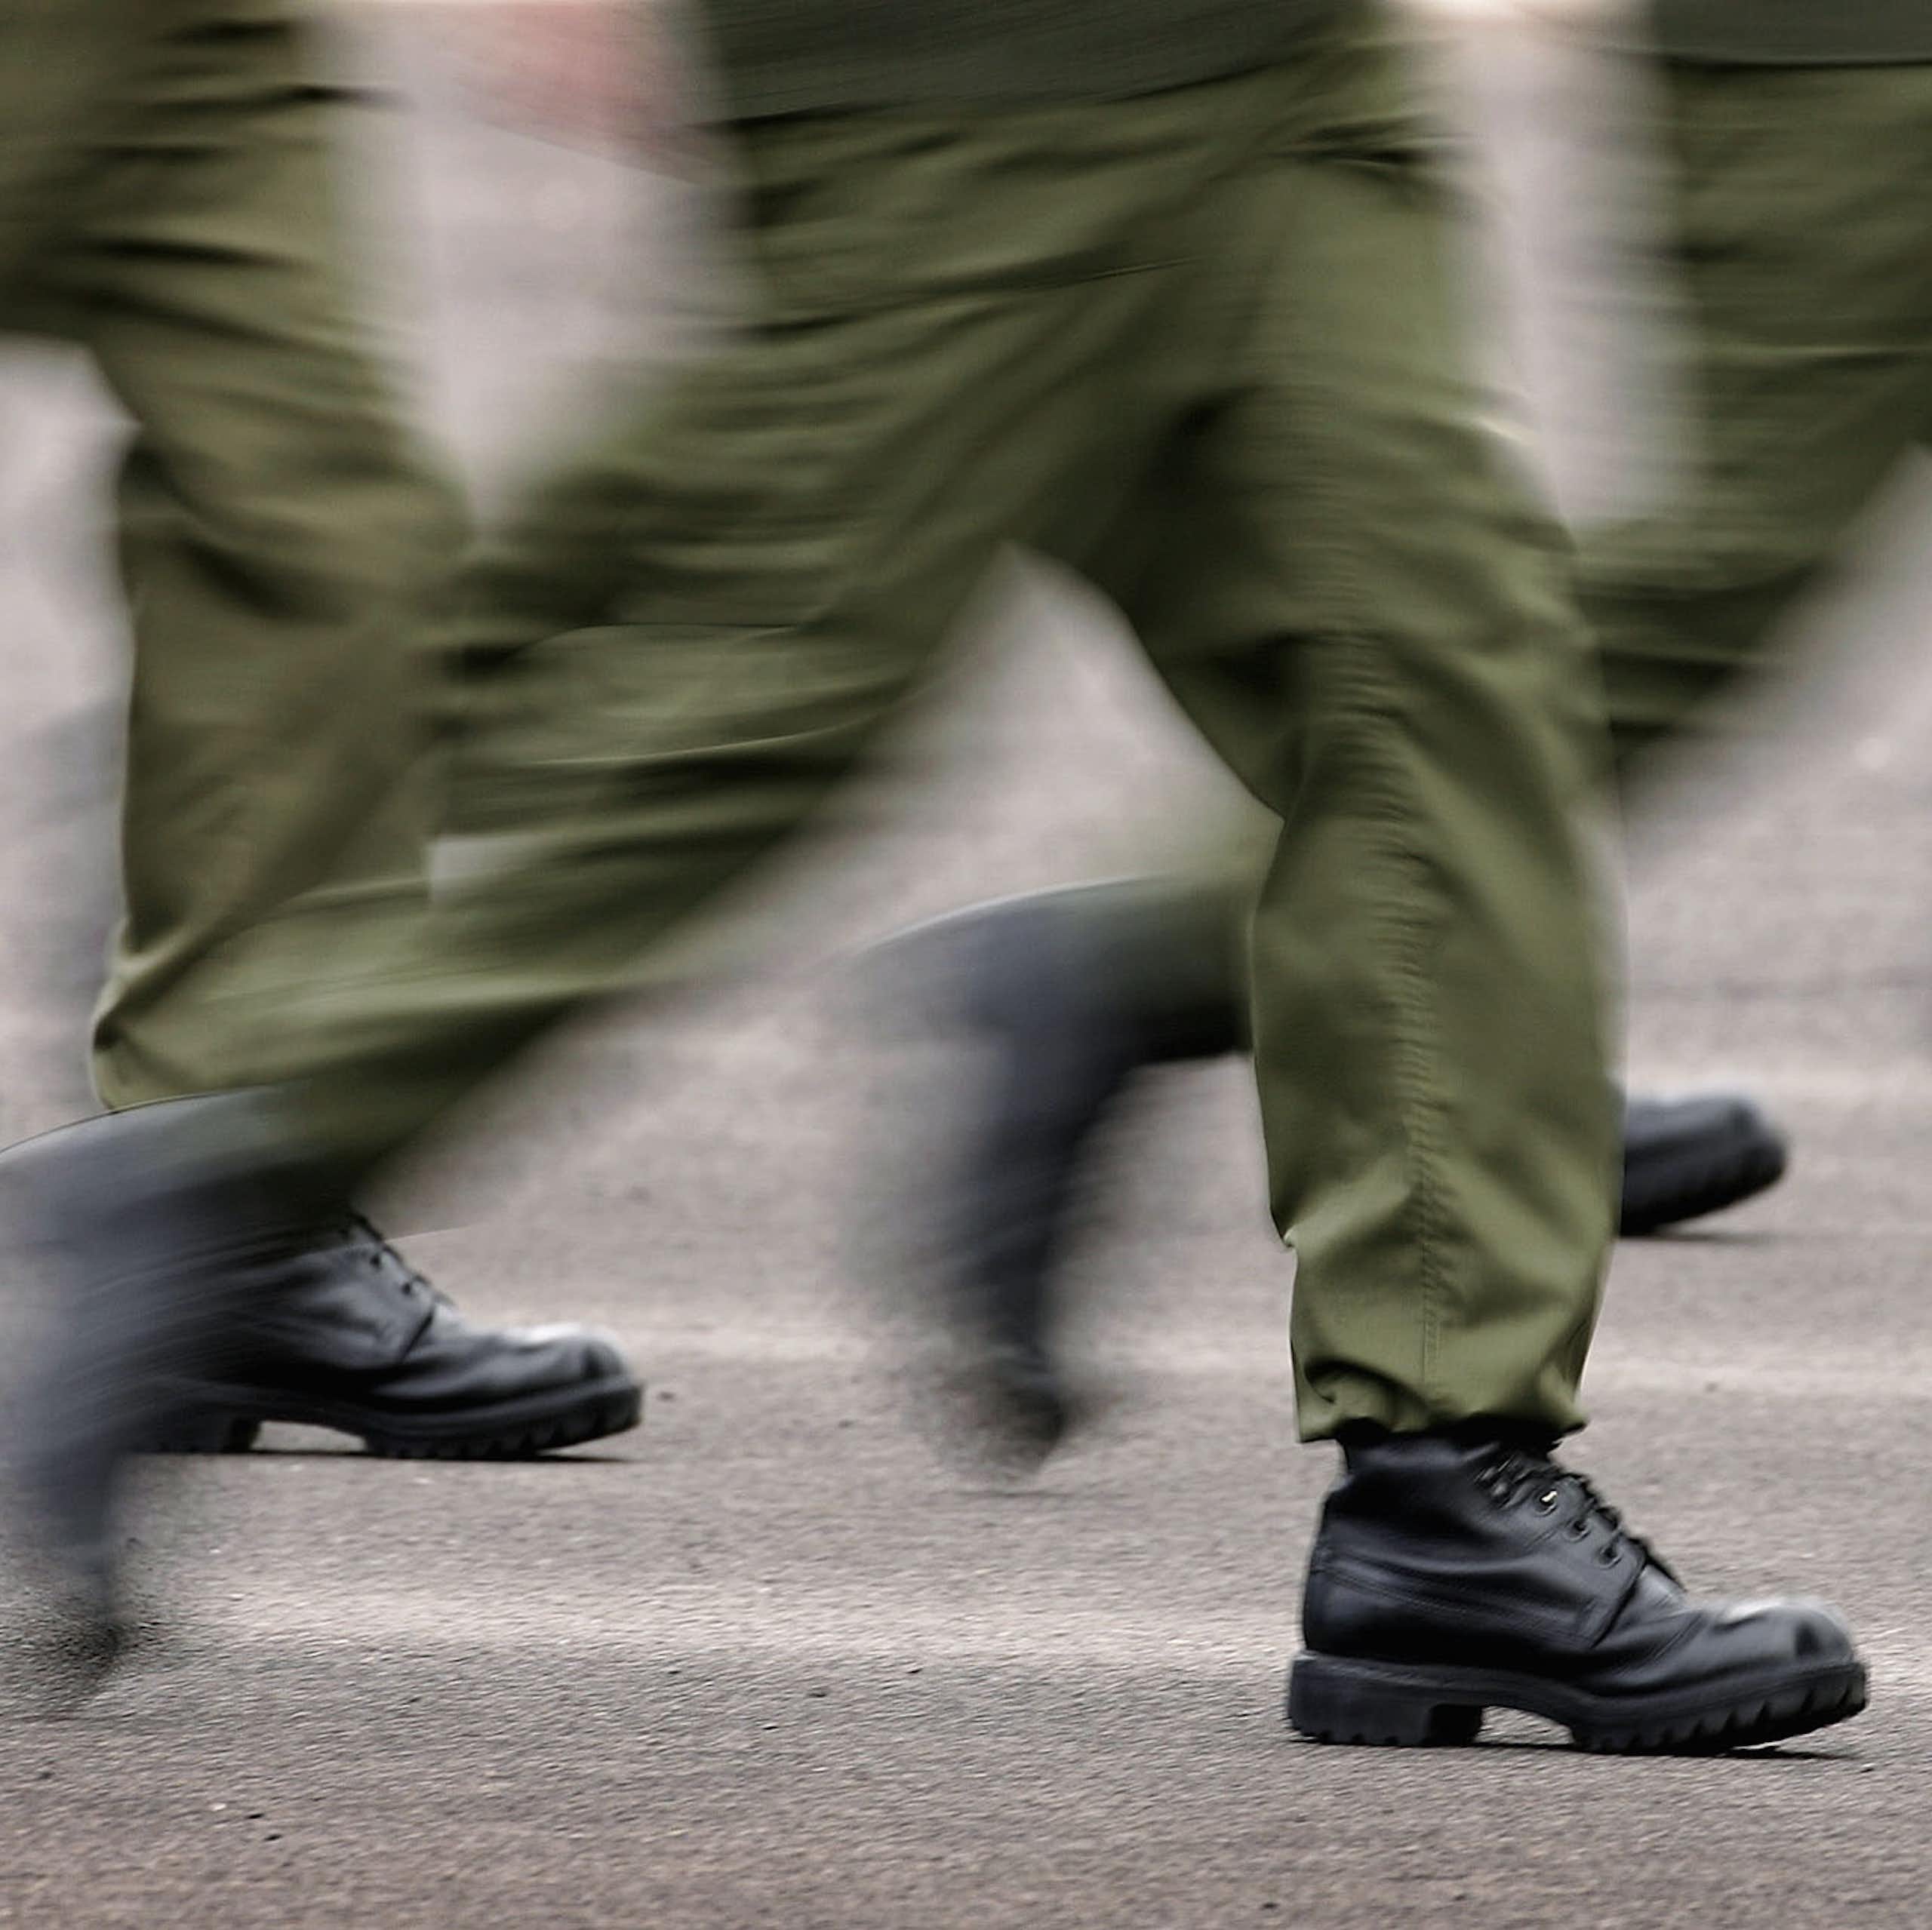 Blurred image of legs running in military style pants and boots